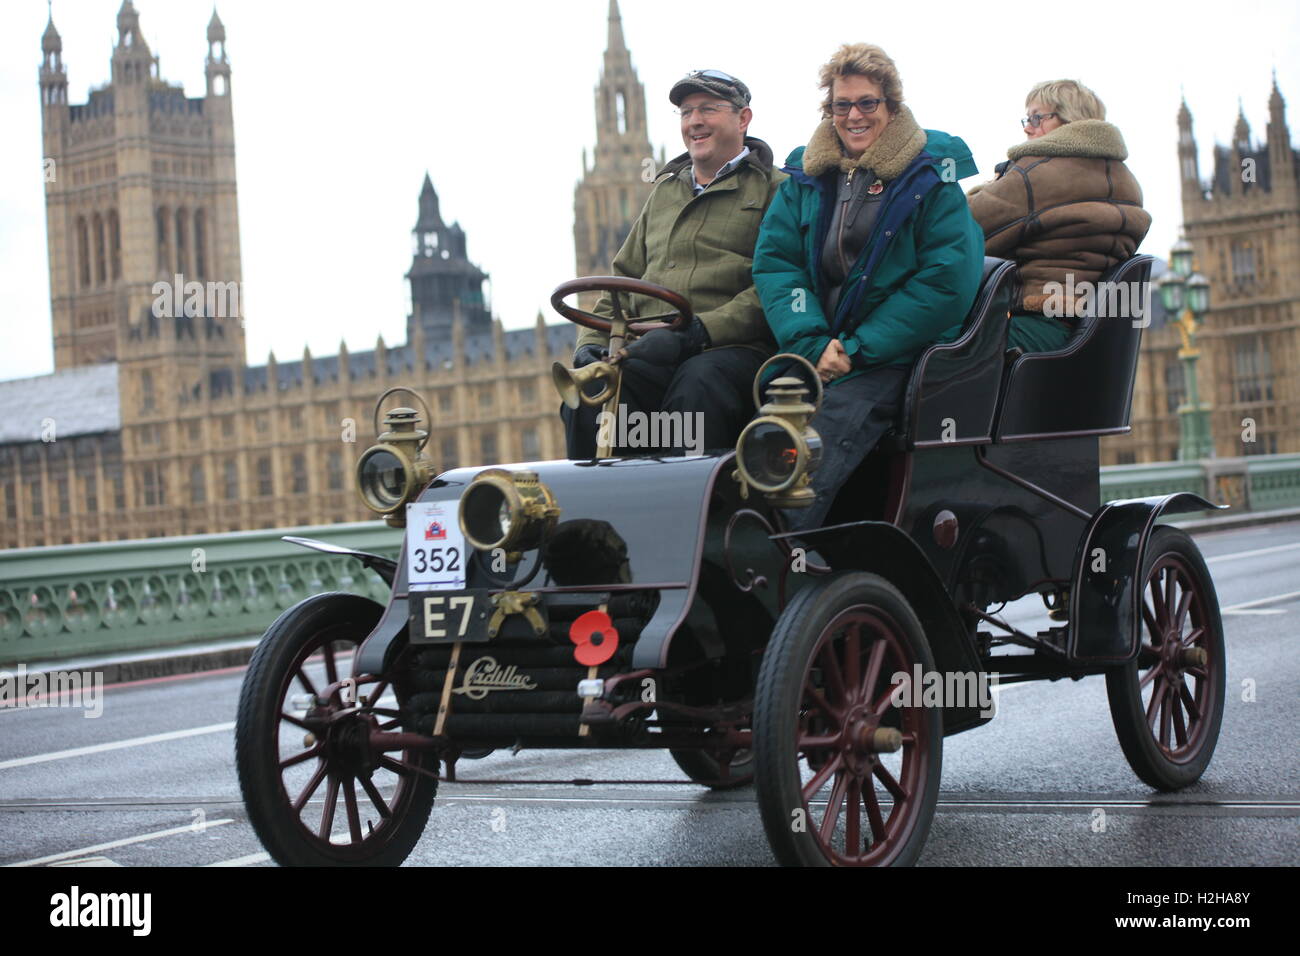 Cadillac veteran car (1904) with The Houses of Parliament in the background during the London to Brighton veteran car run. Stock Photo